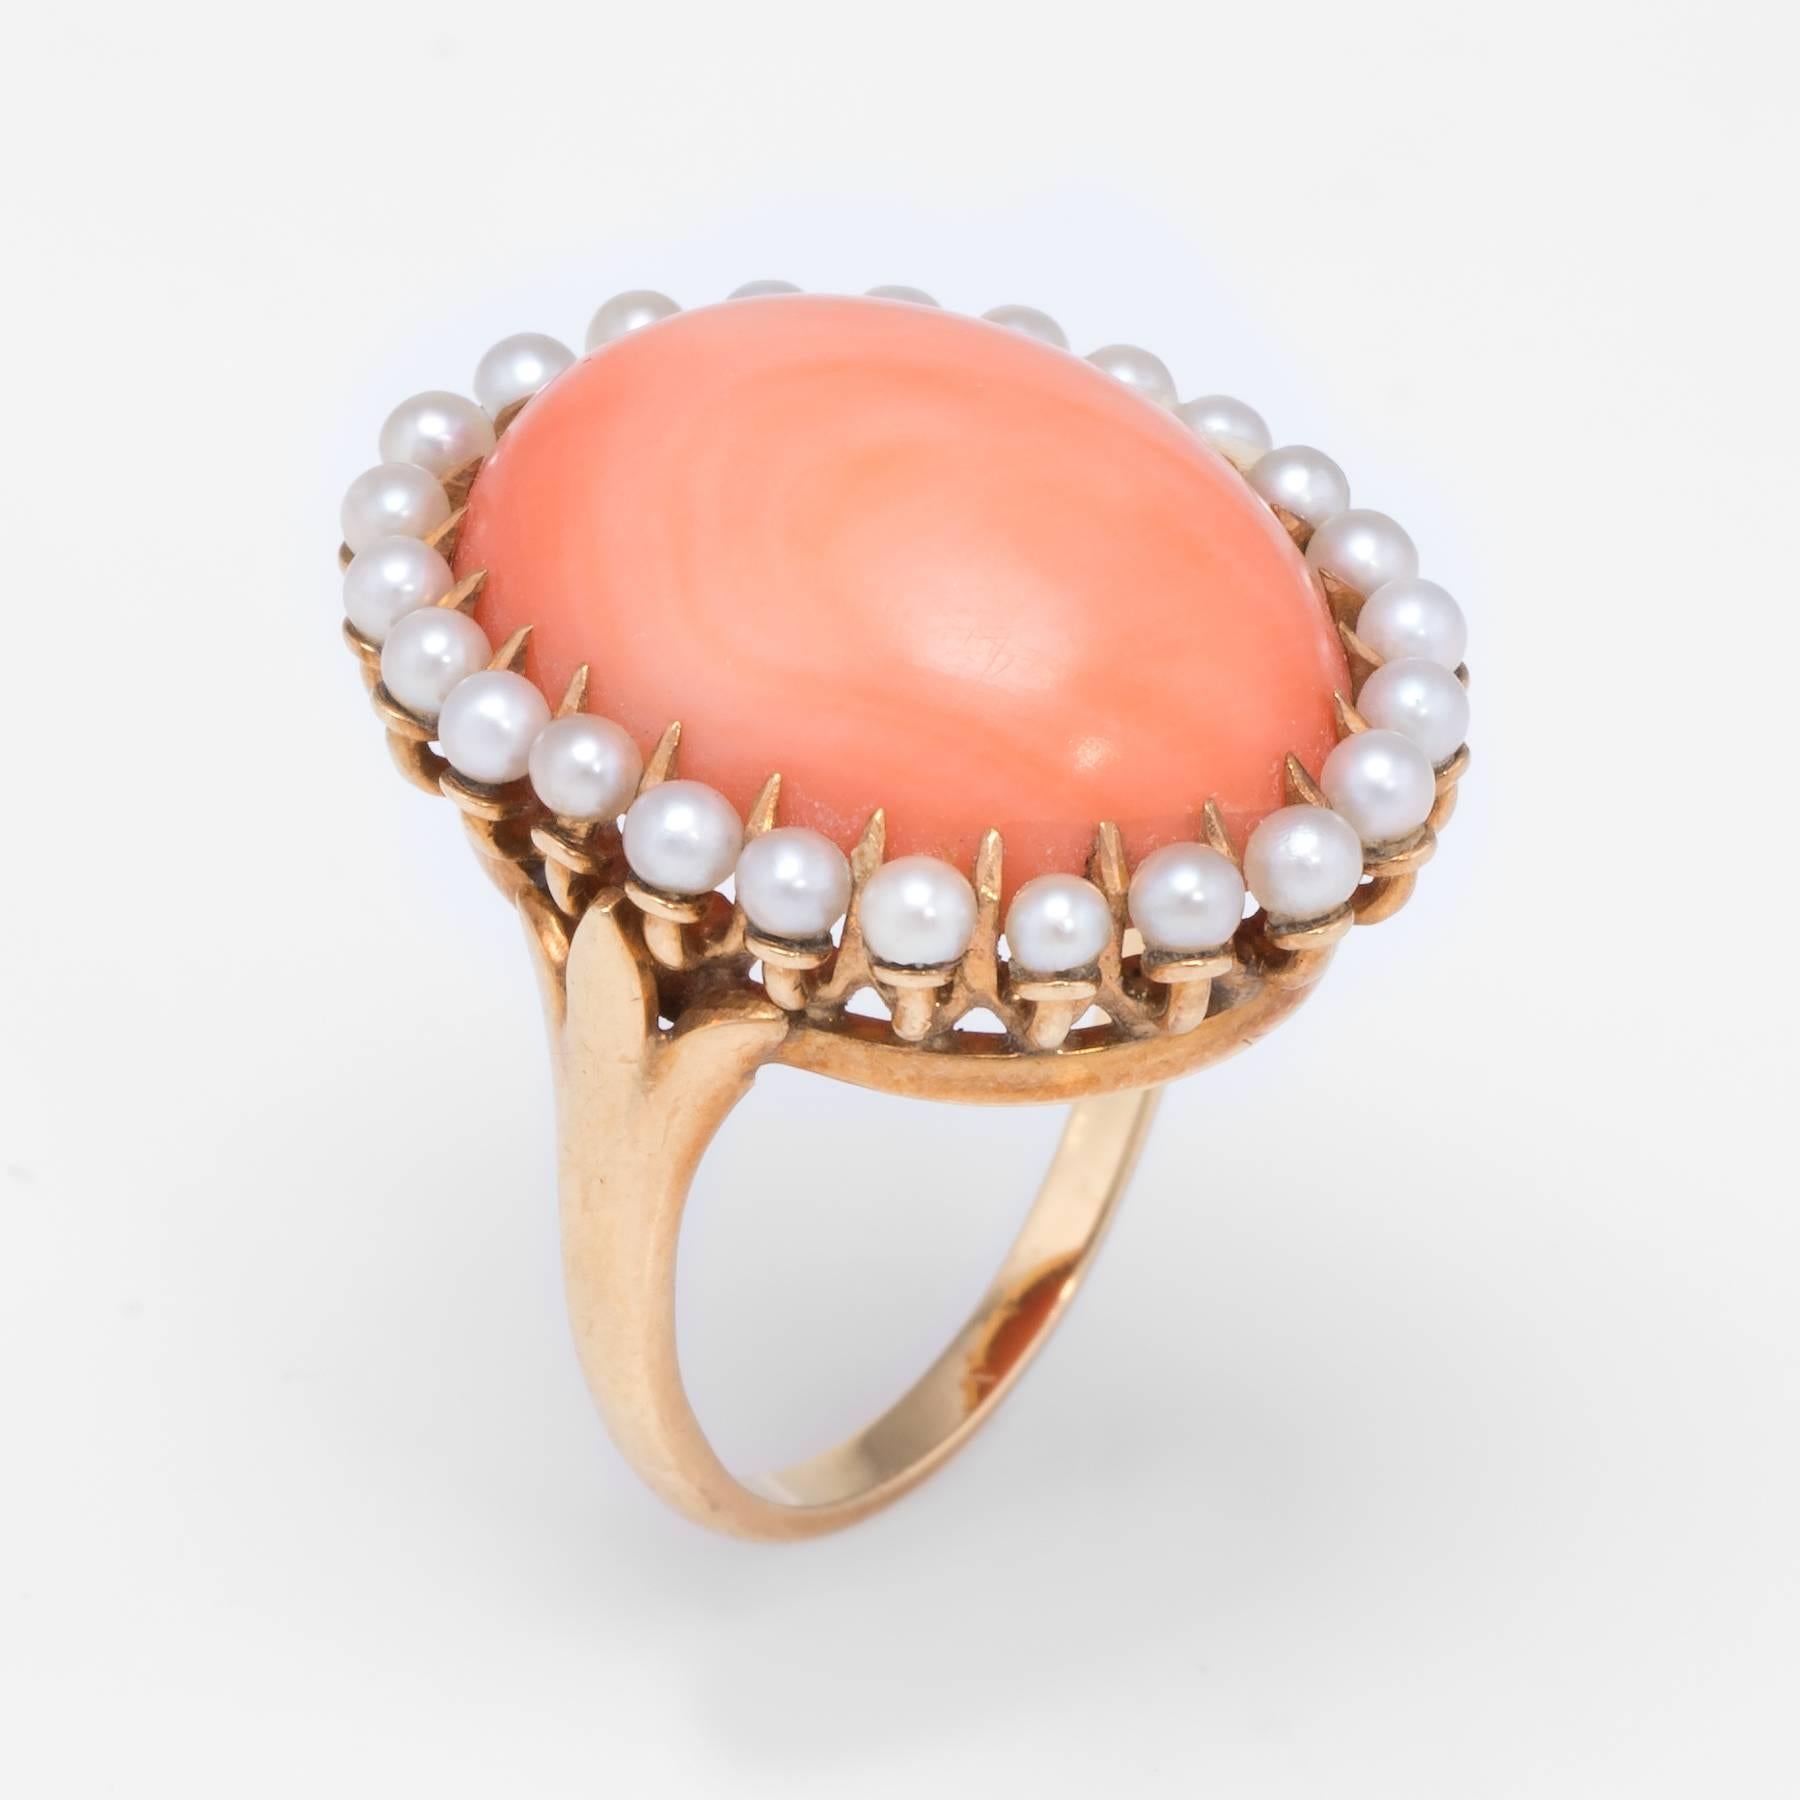 Overview:

Elegant vintage cocktail ring (circa 1940s to 1950s), crafted in 14 karat yellow gold. 

Centrally mounted cabochon cut coral measures 18mm x 13mm (estimated at 8 carats), accented with 1.5mm seed pearls. The coral is in excellent